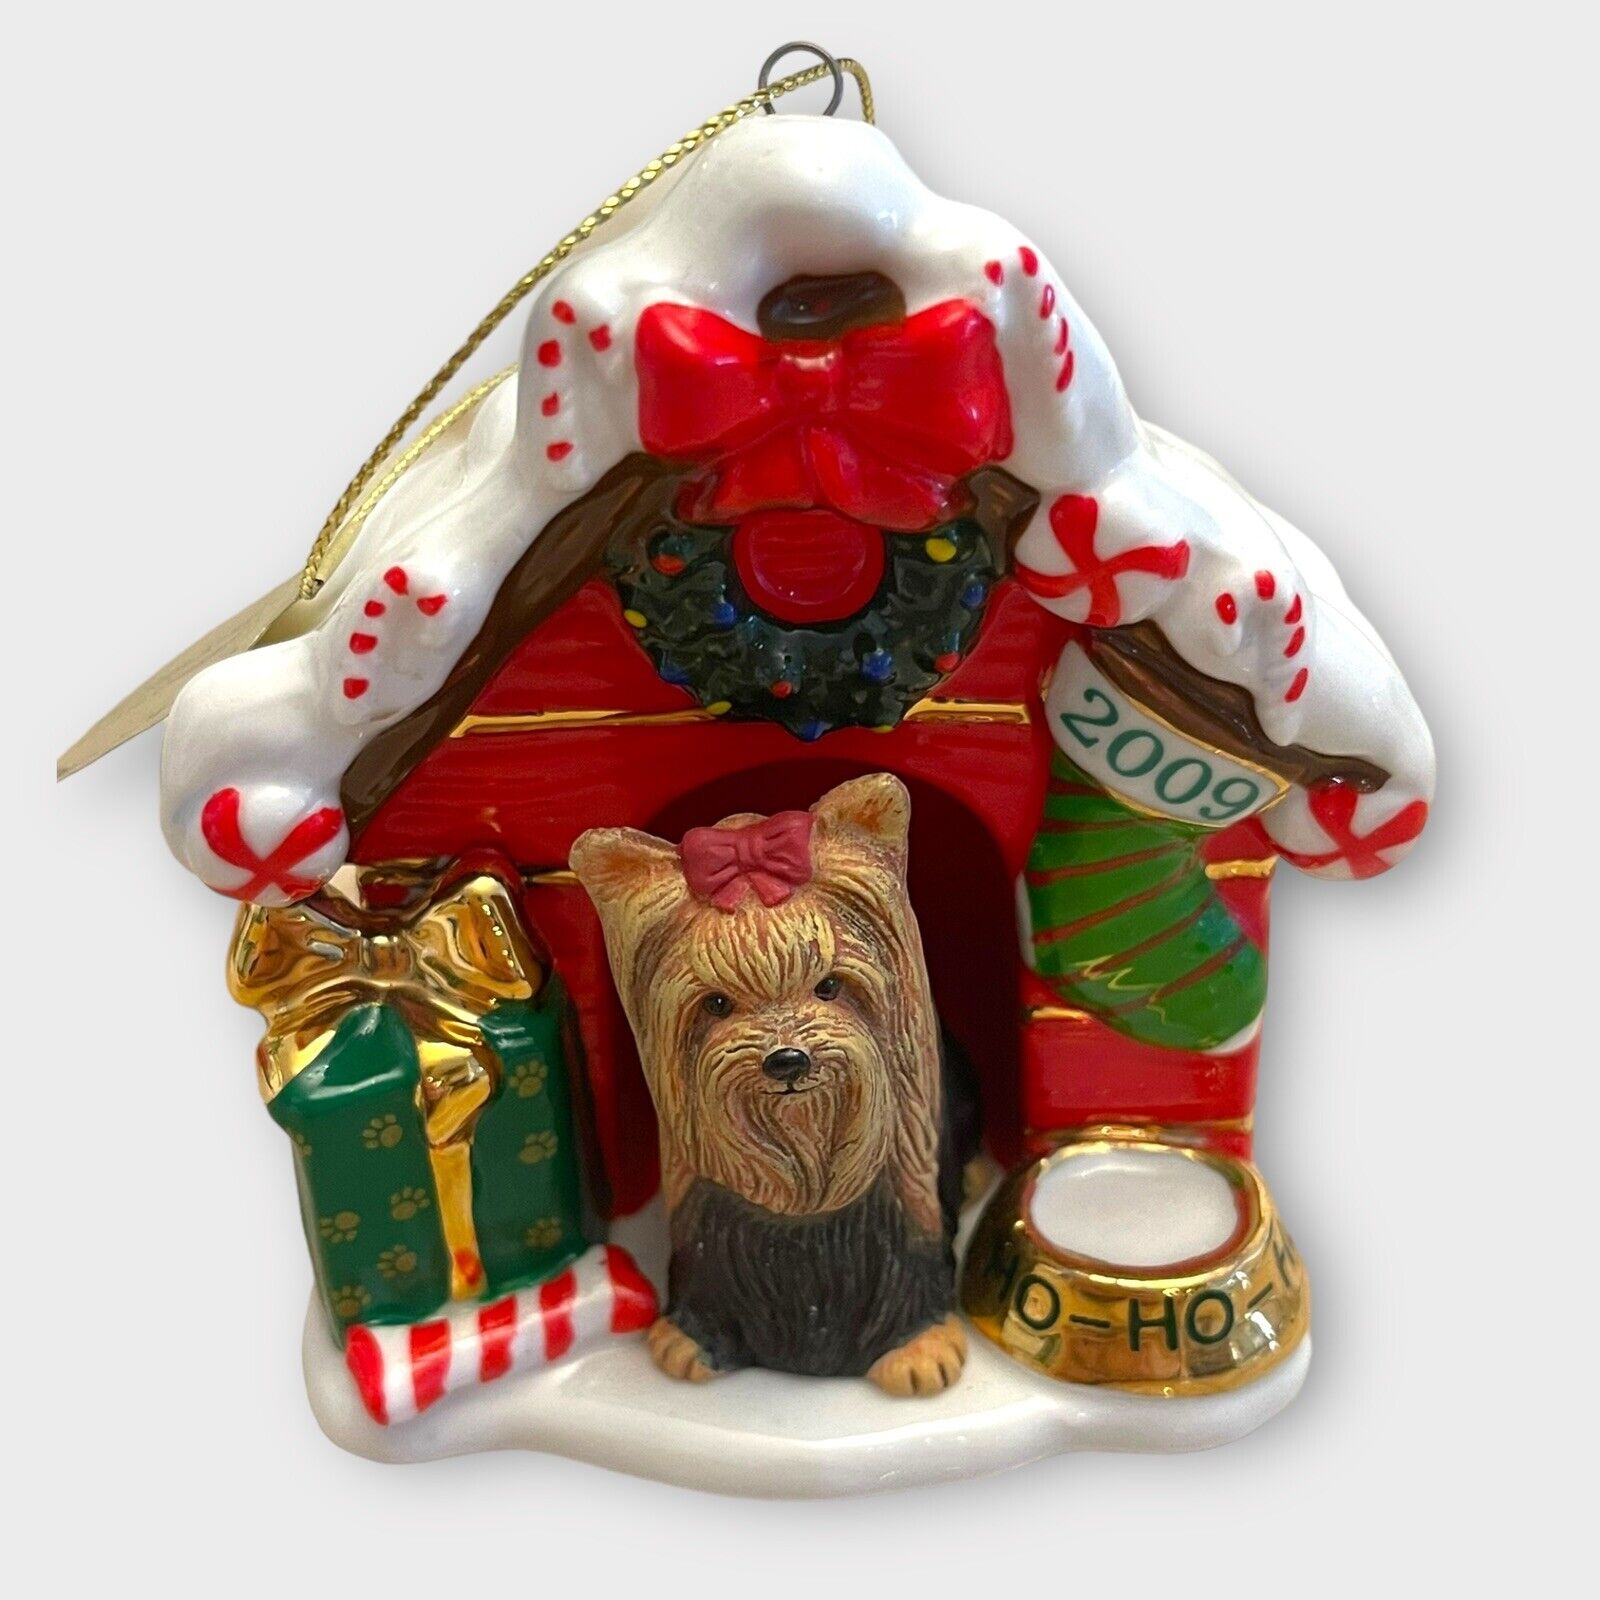 Danbury Mint Yorkie Ornament Dog Home For Holidays 2009 Porcelain New with Box